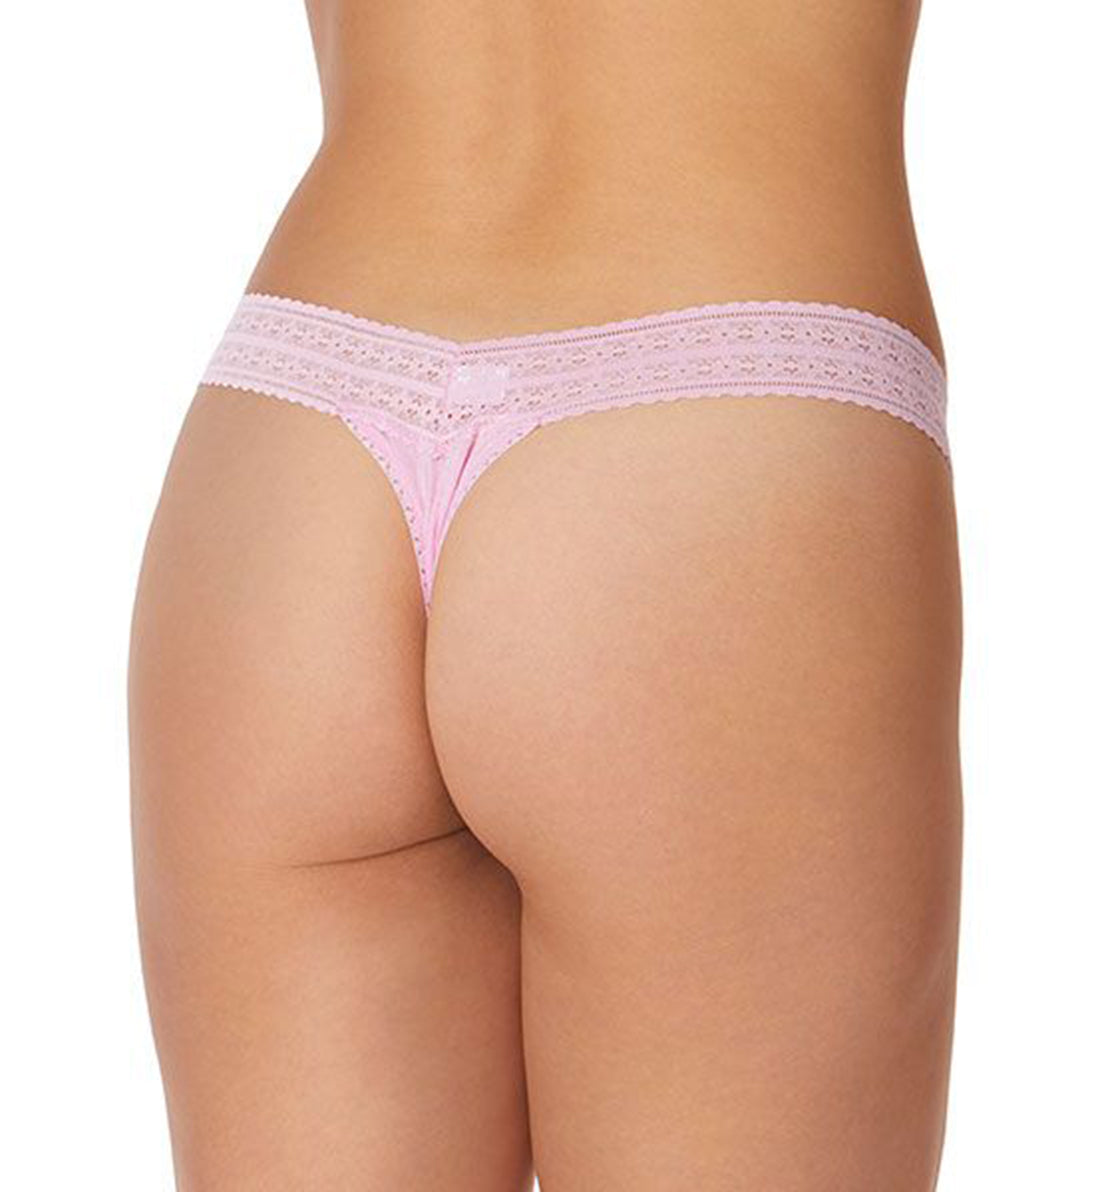 Hanky Panky Dream Low Rise Thong (631004),Cotton Candy Pink - Cotton Candy Pink,One Size